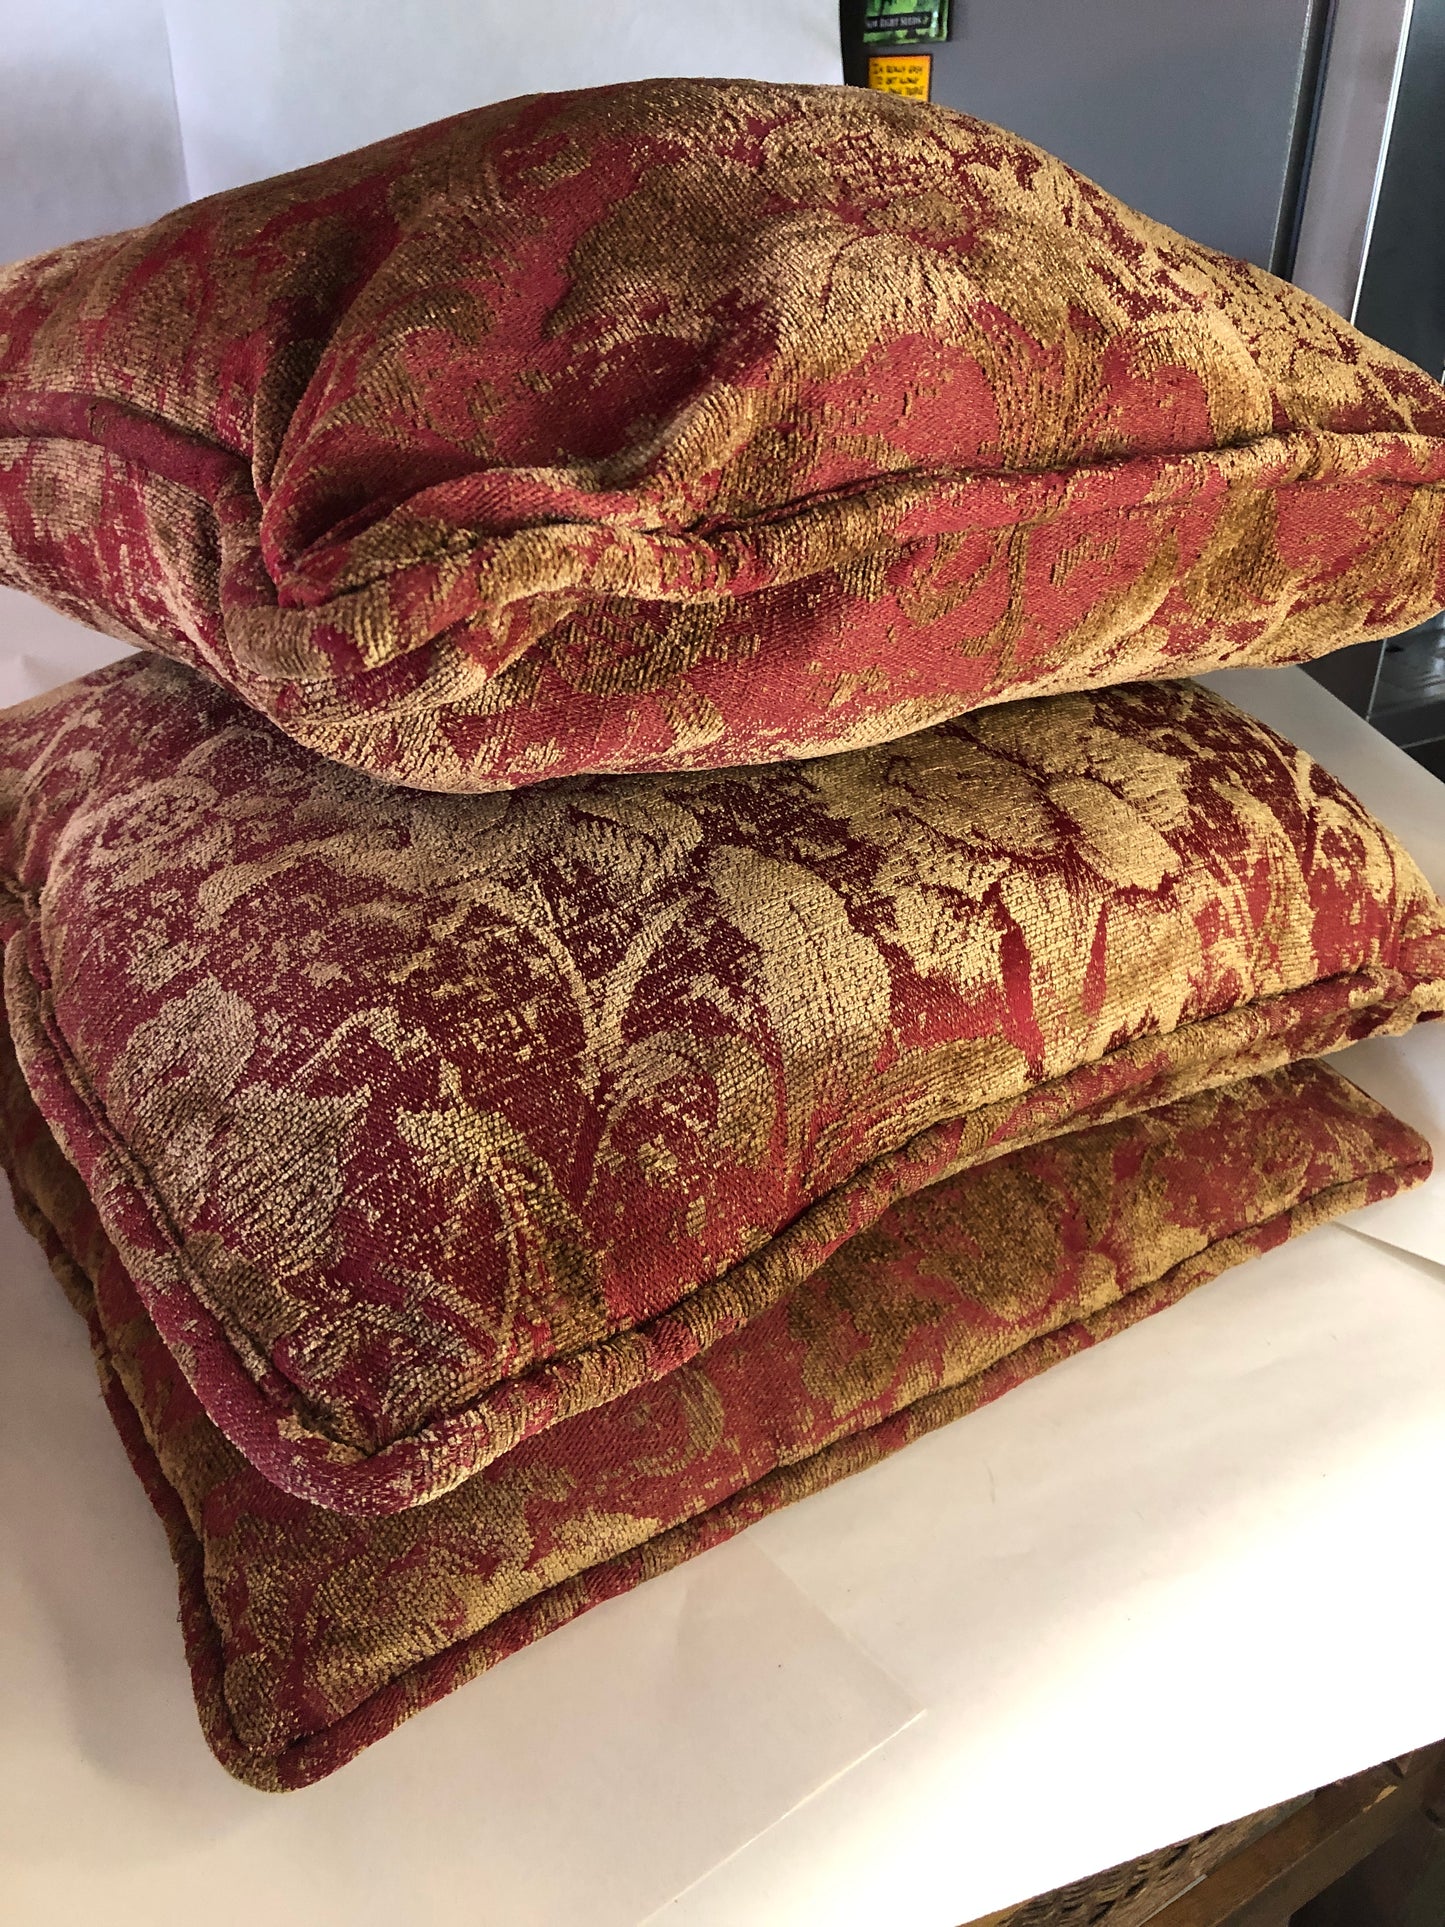 Used Six Piece Square Throw Pillow and Bolster Set Peonies in Reddish-Brown